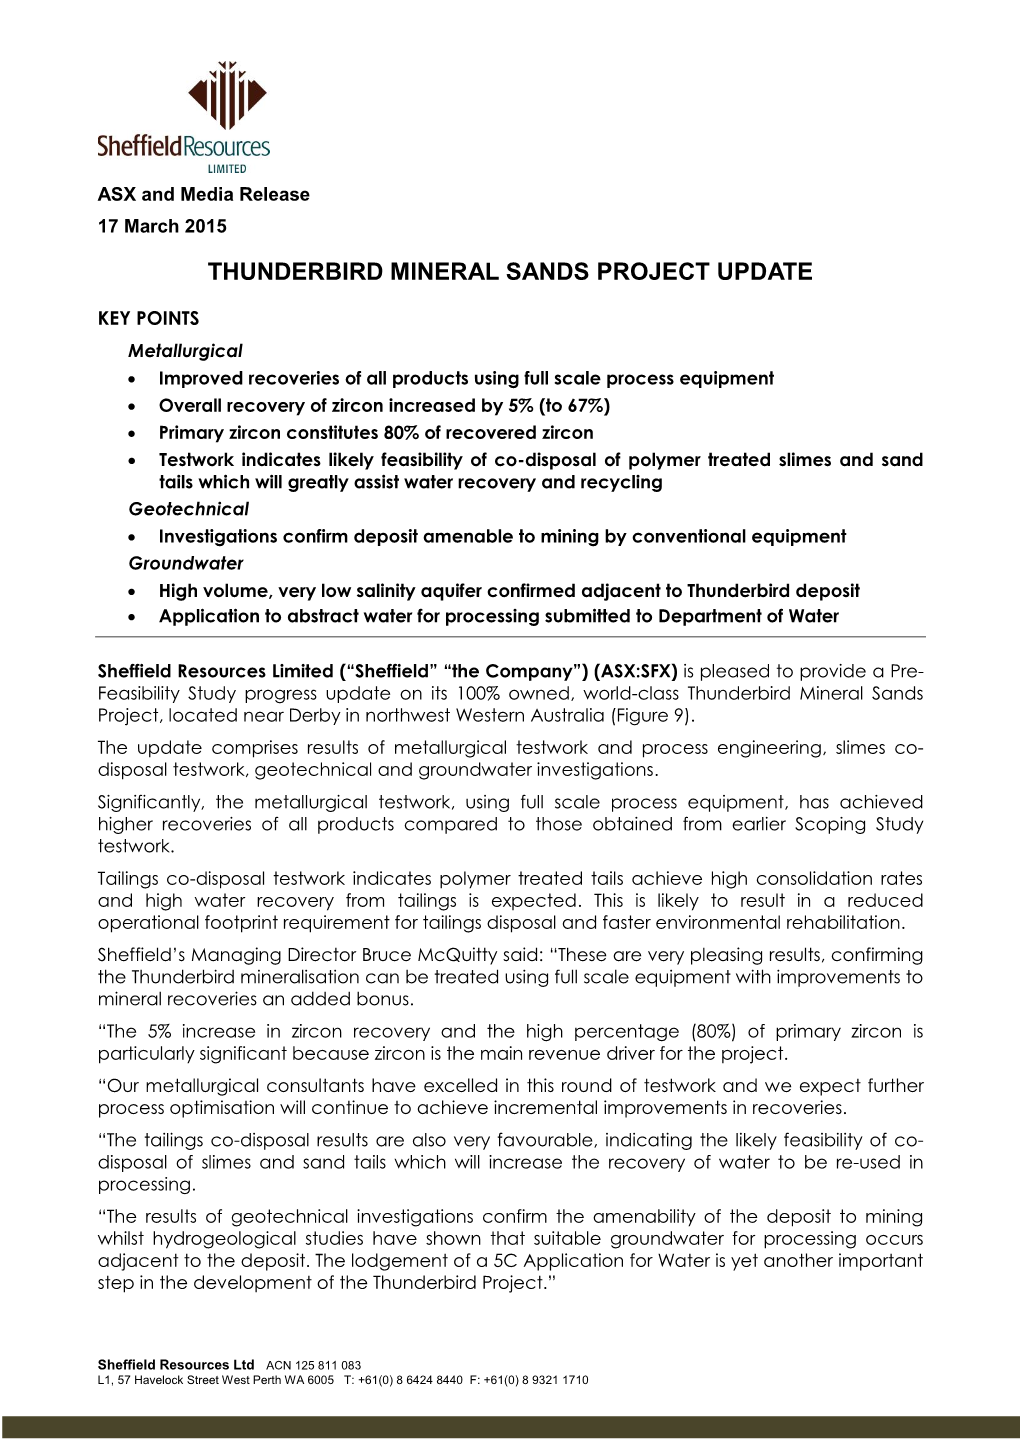 Thunderbird Mineral Sands Project Update